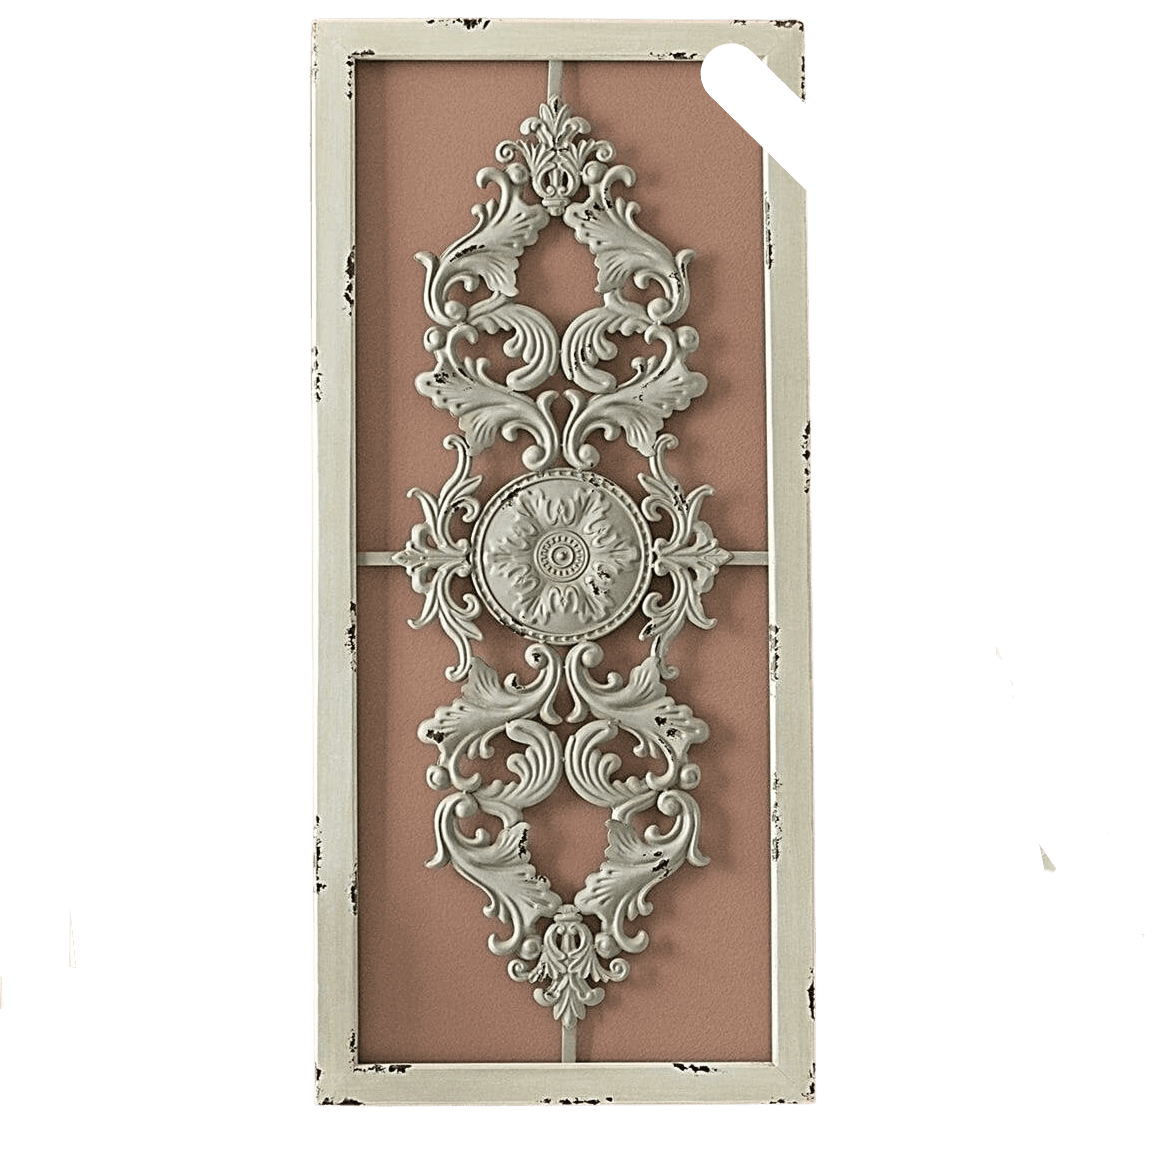 Vintage Scroll Panel Wall Decor Art Sculpture - Home Decor Gifts and More